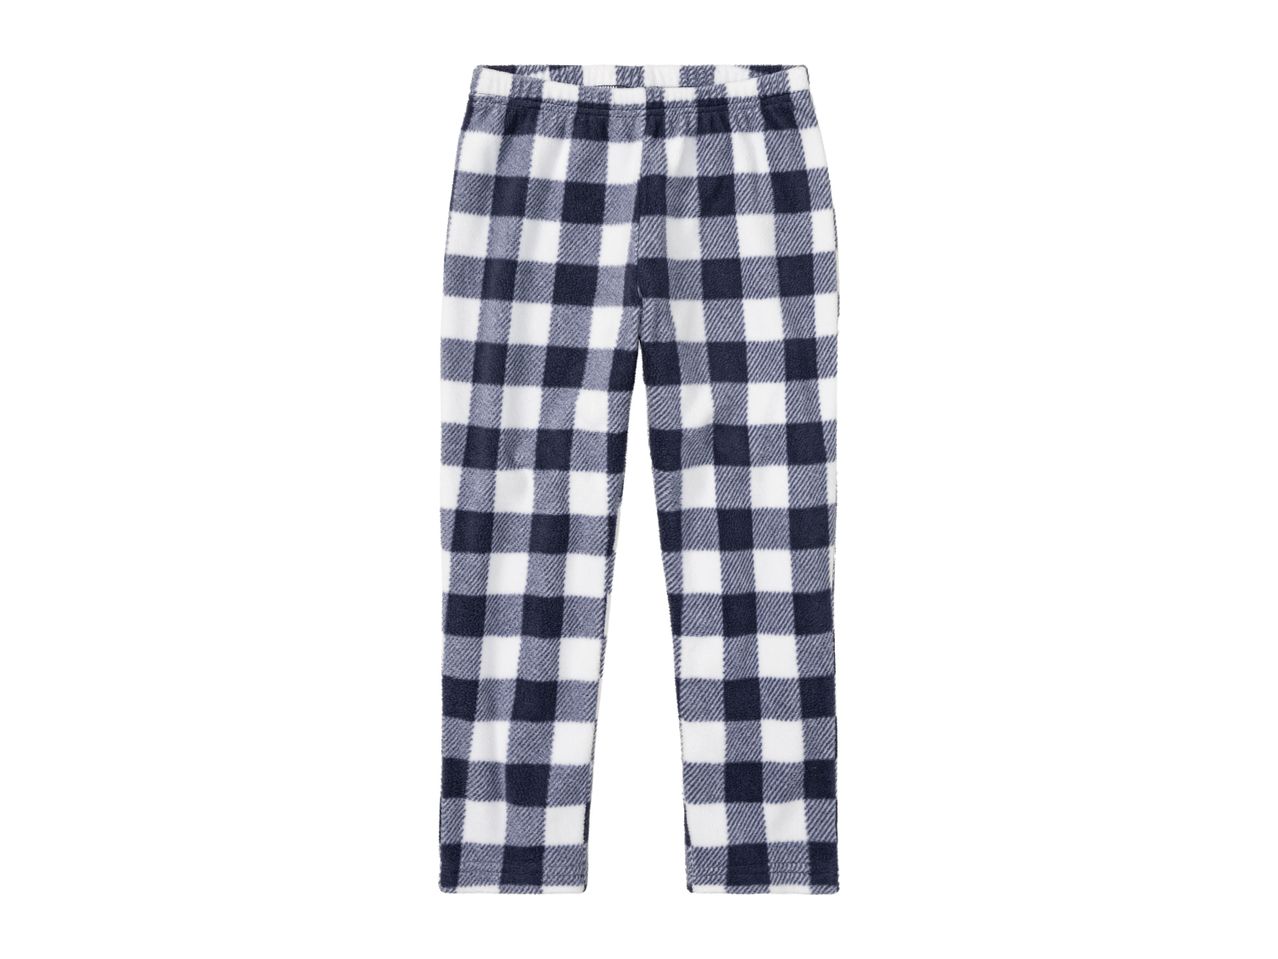 Go to full screen view: Lupilu Younger Kids' Pyjamas - Image 3